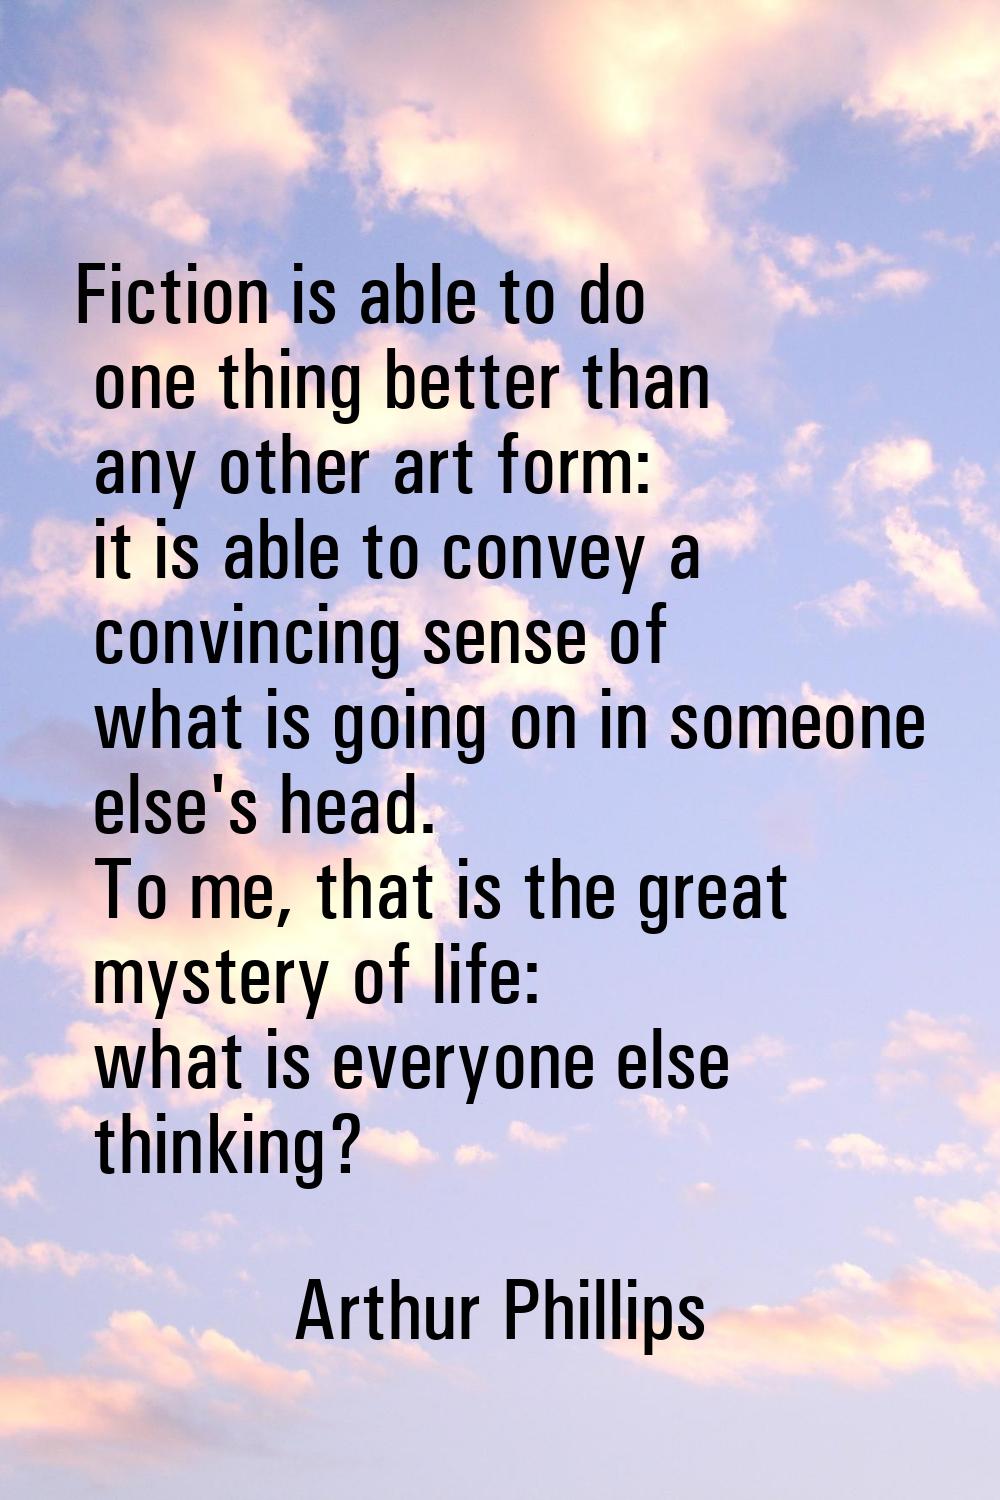 Fiction is able to do one thing better than any other art form: it is able to convey a convincing s